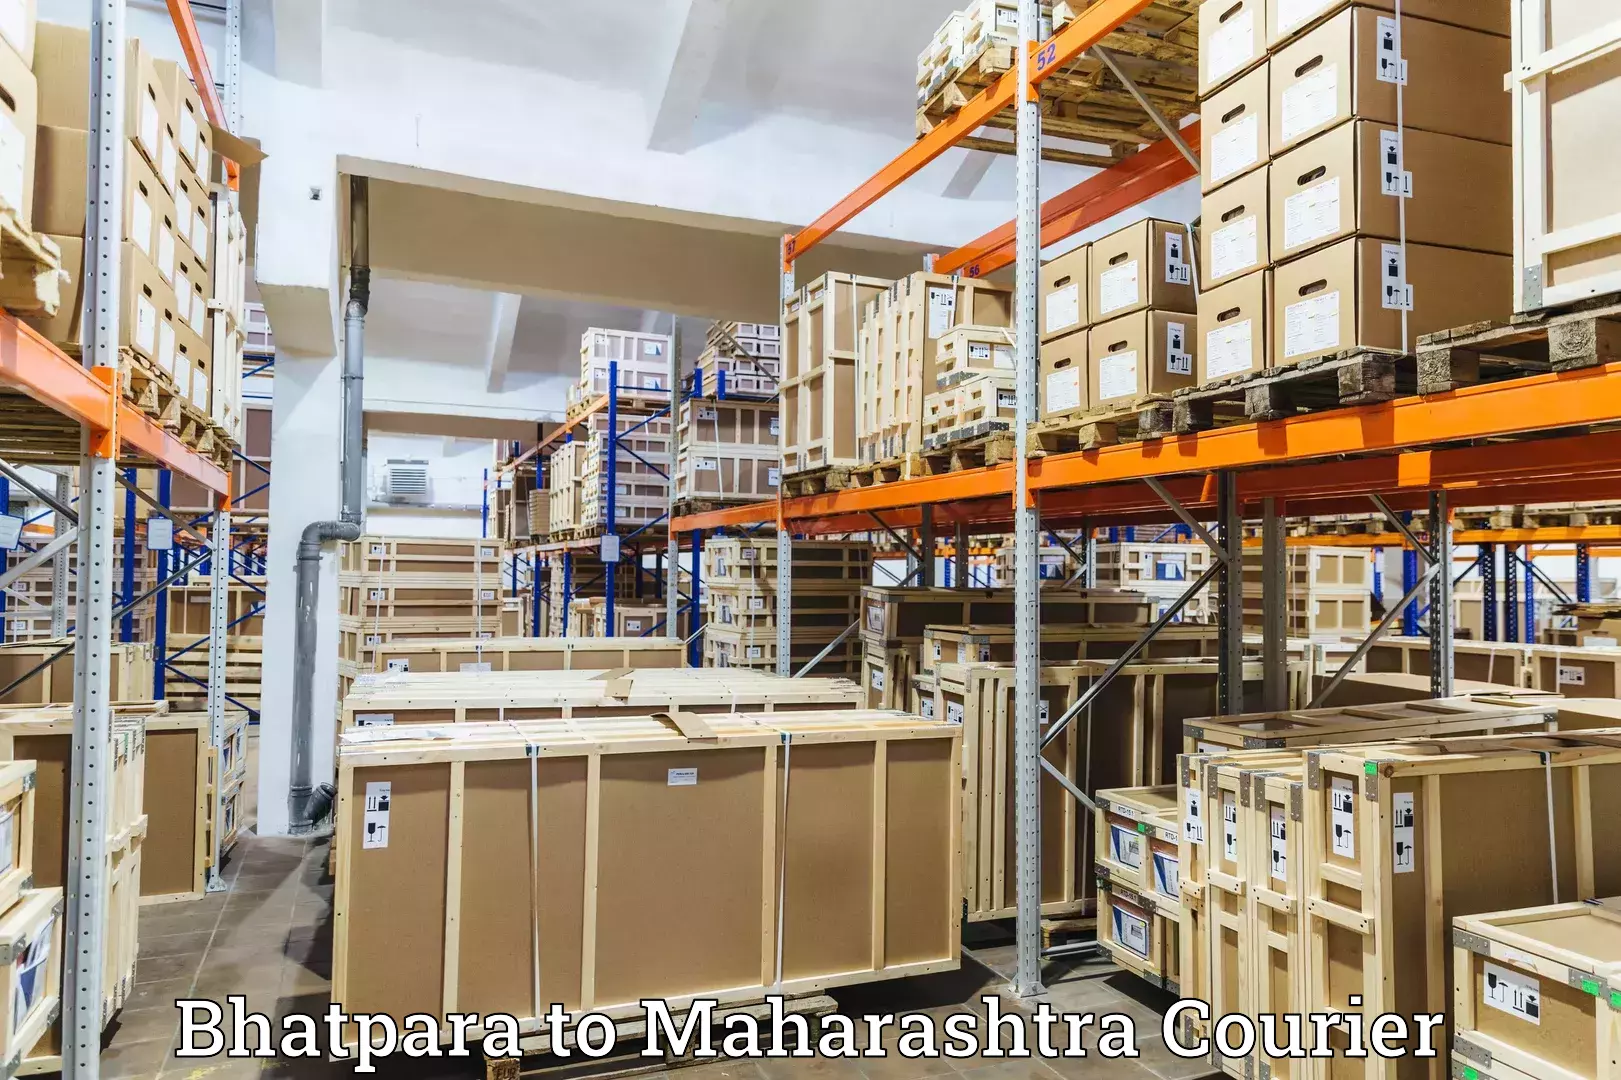 Courier service innovation in Bhatpara to Rajapur